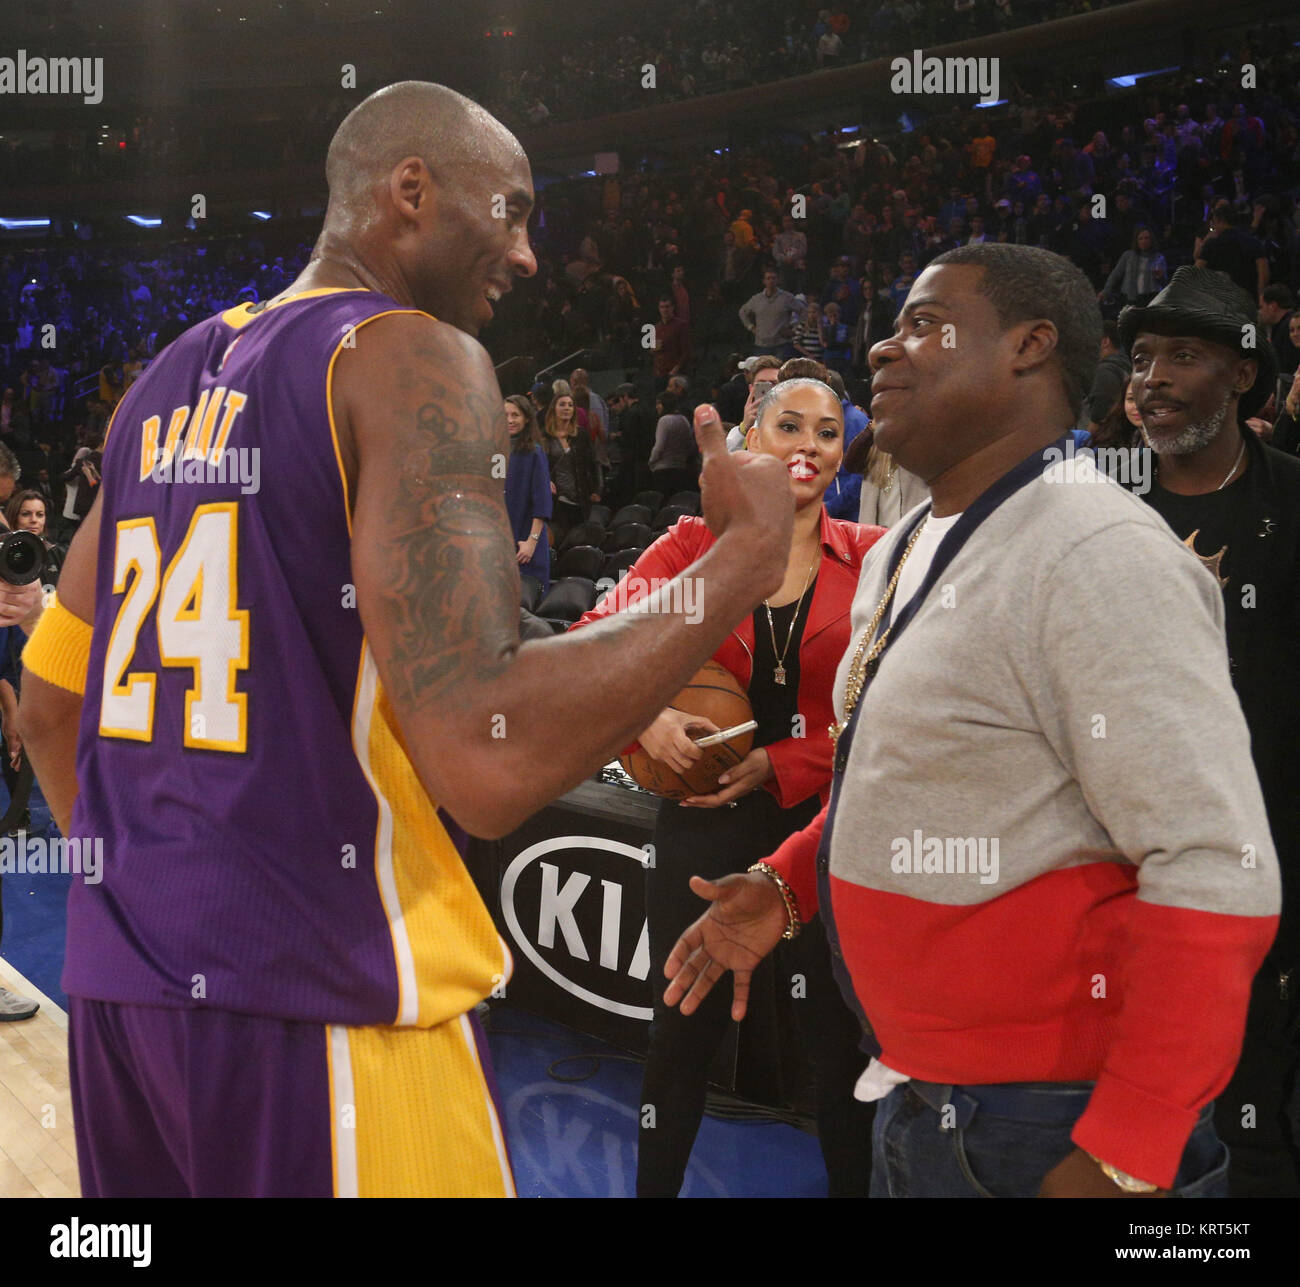 NEW YORK, NY - NOVEMBER 08: (Embargoed till November 10, 2015) Magic Johnson, Tracy Morgan with wife Megan Wollover sit with Michael K. Williams and  Director Spike Lee at the New York Knicks vs Los Angeles Lakers game at Madison Square Garden on November 8, 2015 in New York City.   People:  Tracy Morgan, Kobe Bryant Stock Photo